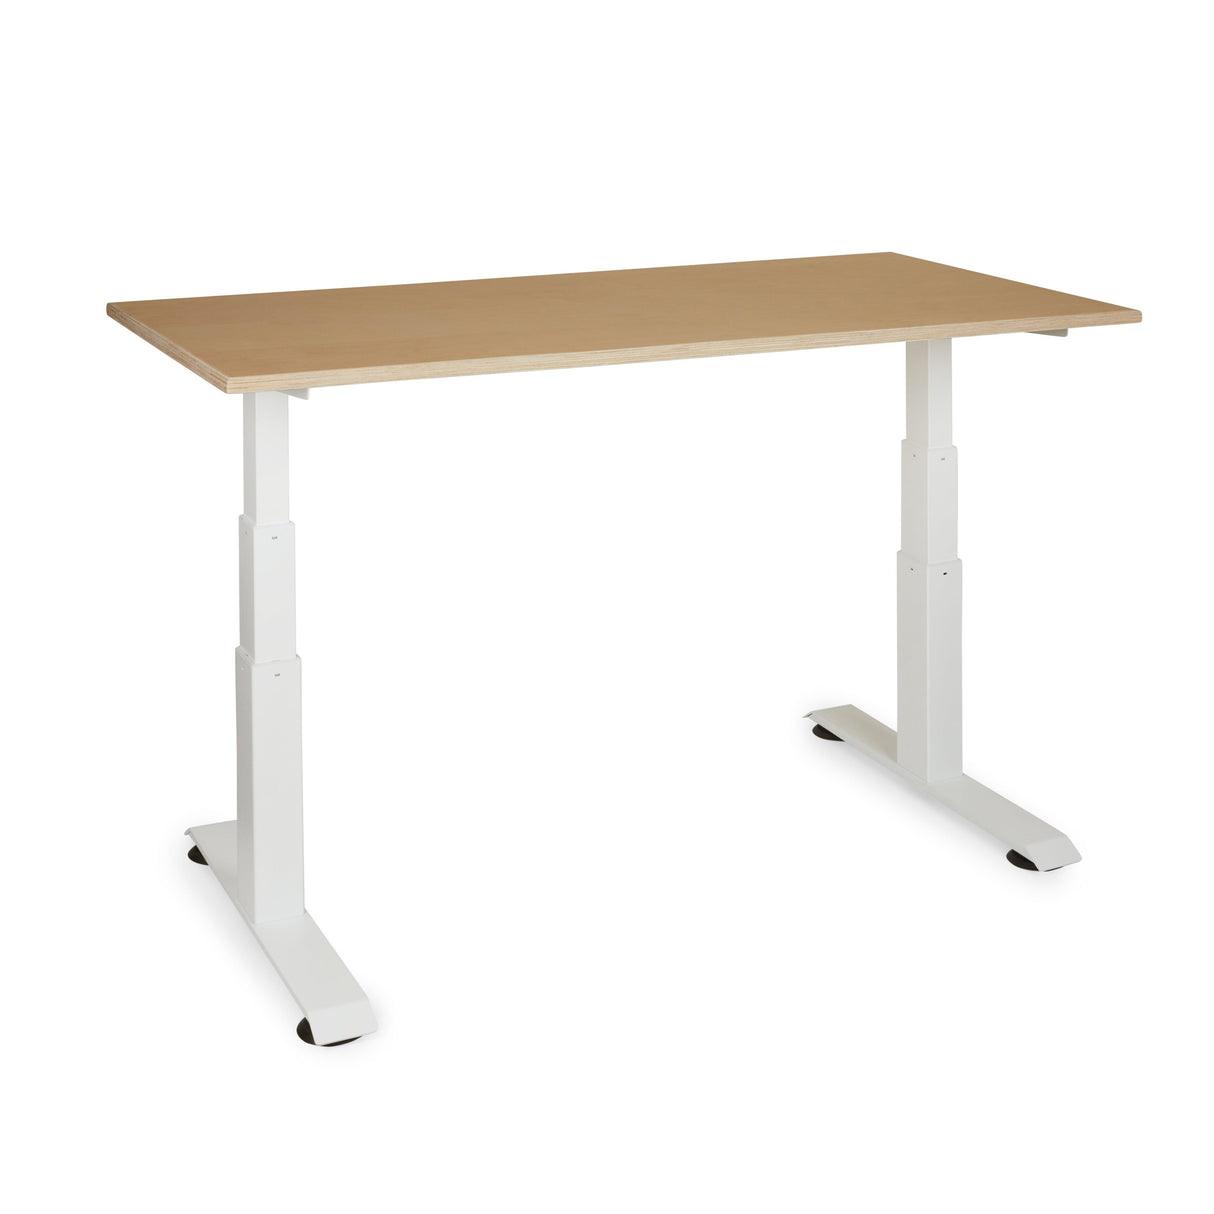 Adjusto Height Adjustable Motorized coffee/dining/kids table frame - Ply Online